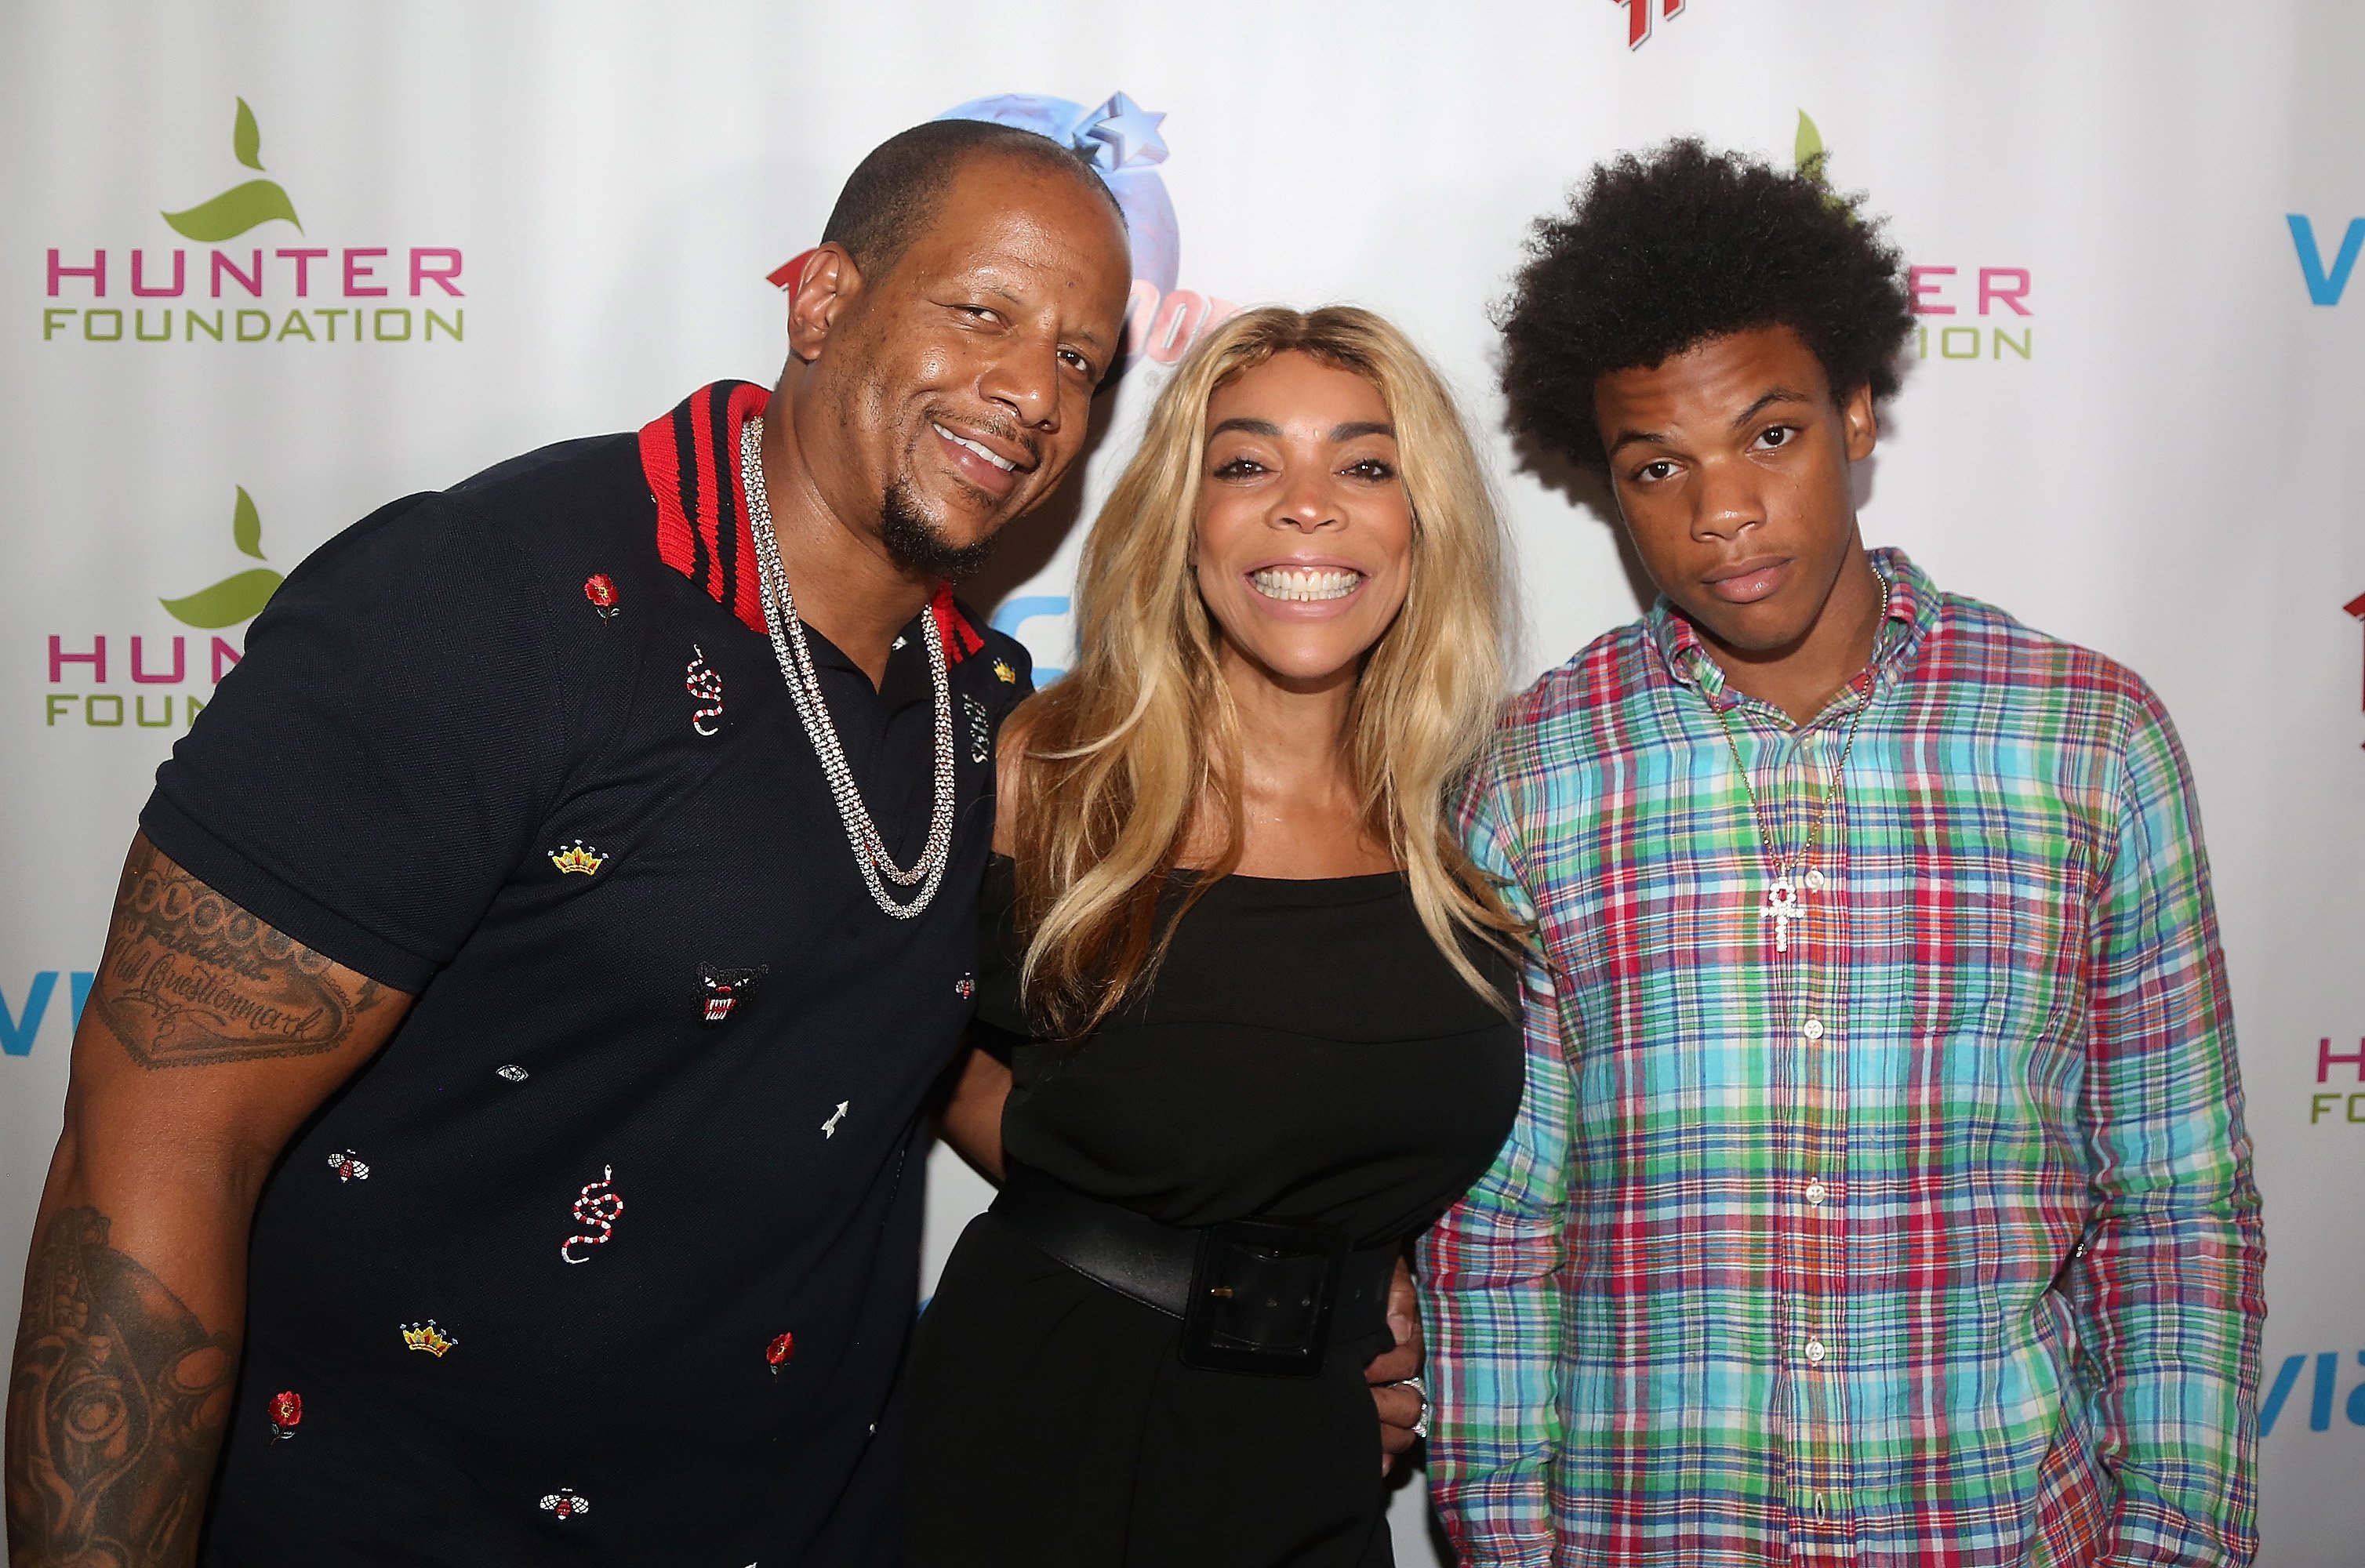 (L-R) Kevin Hunter Sr., Wendy Williams & Kevin Hunter Jr. in New York City on July 11, 2017 | Photo: Getty Images